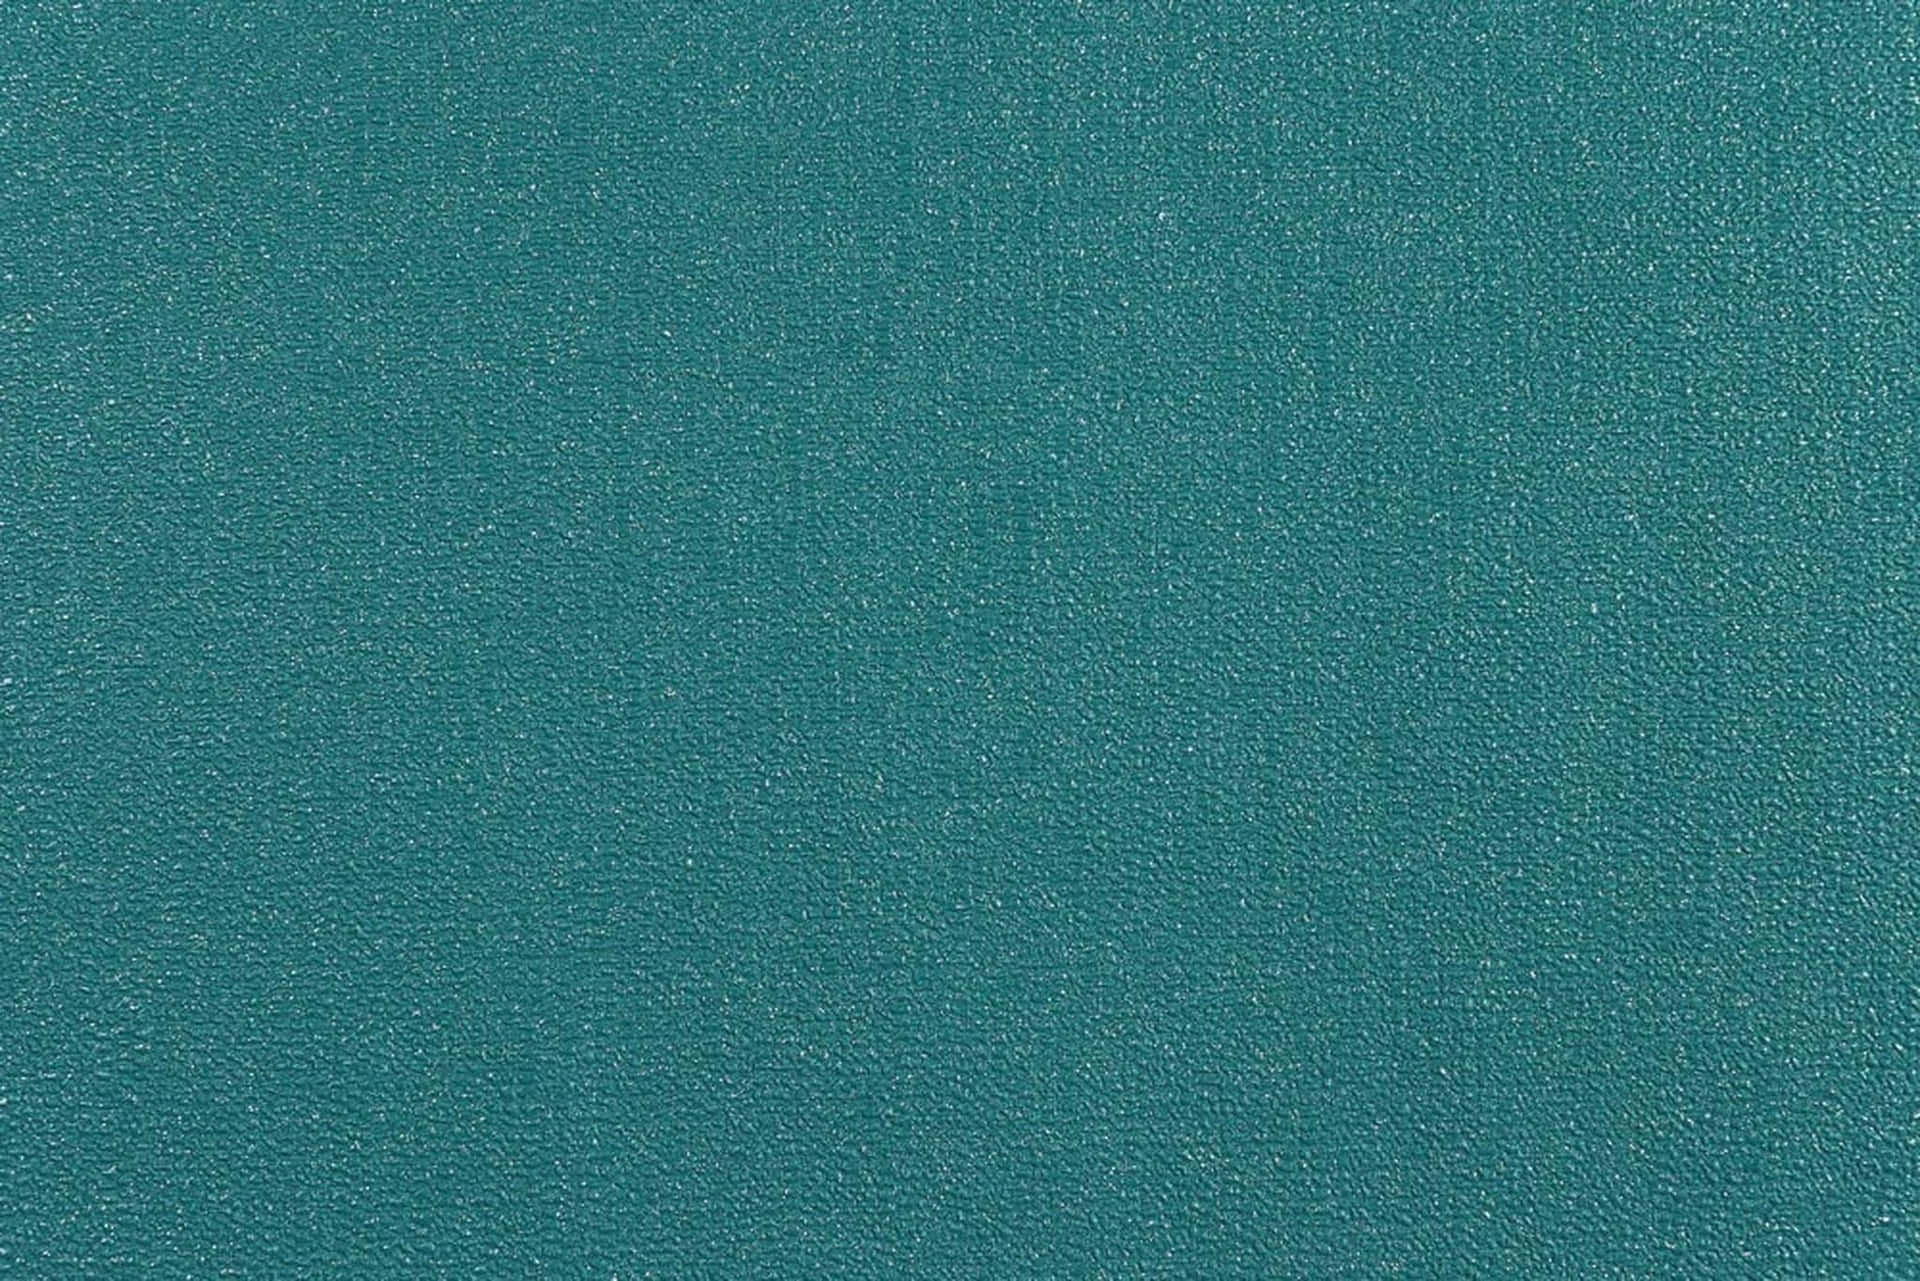 "A deep emerald green background, perfect for elegant projects"